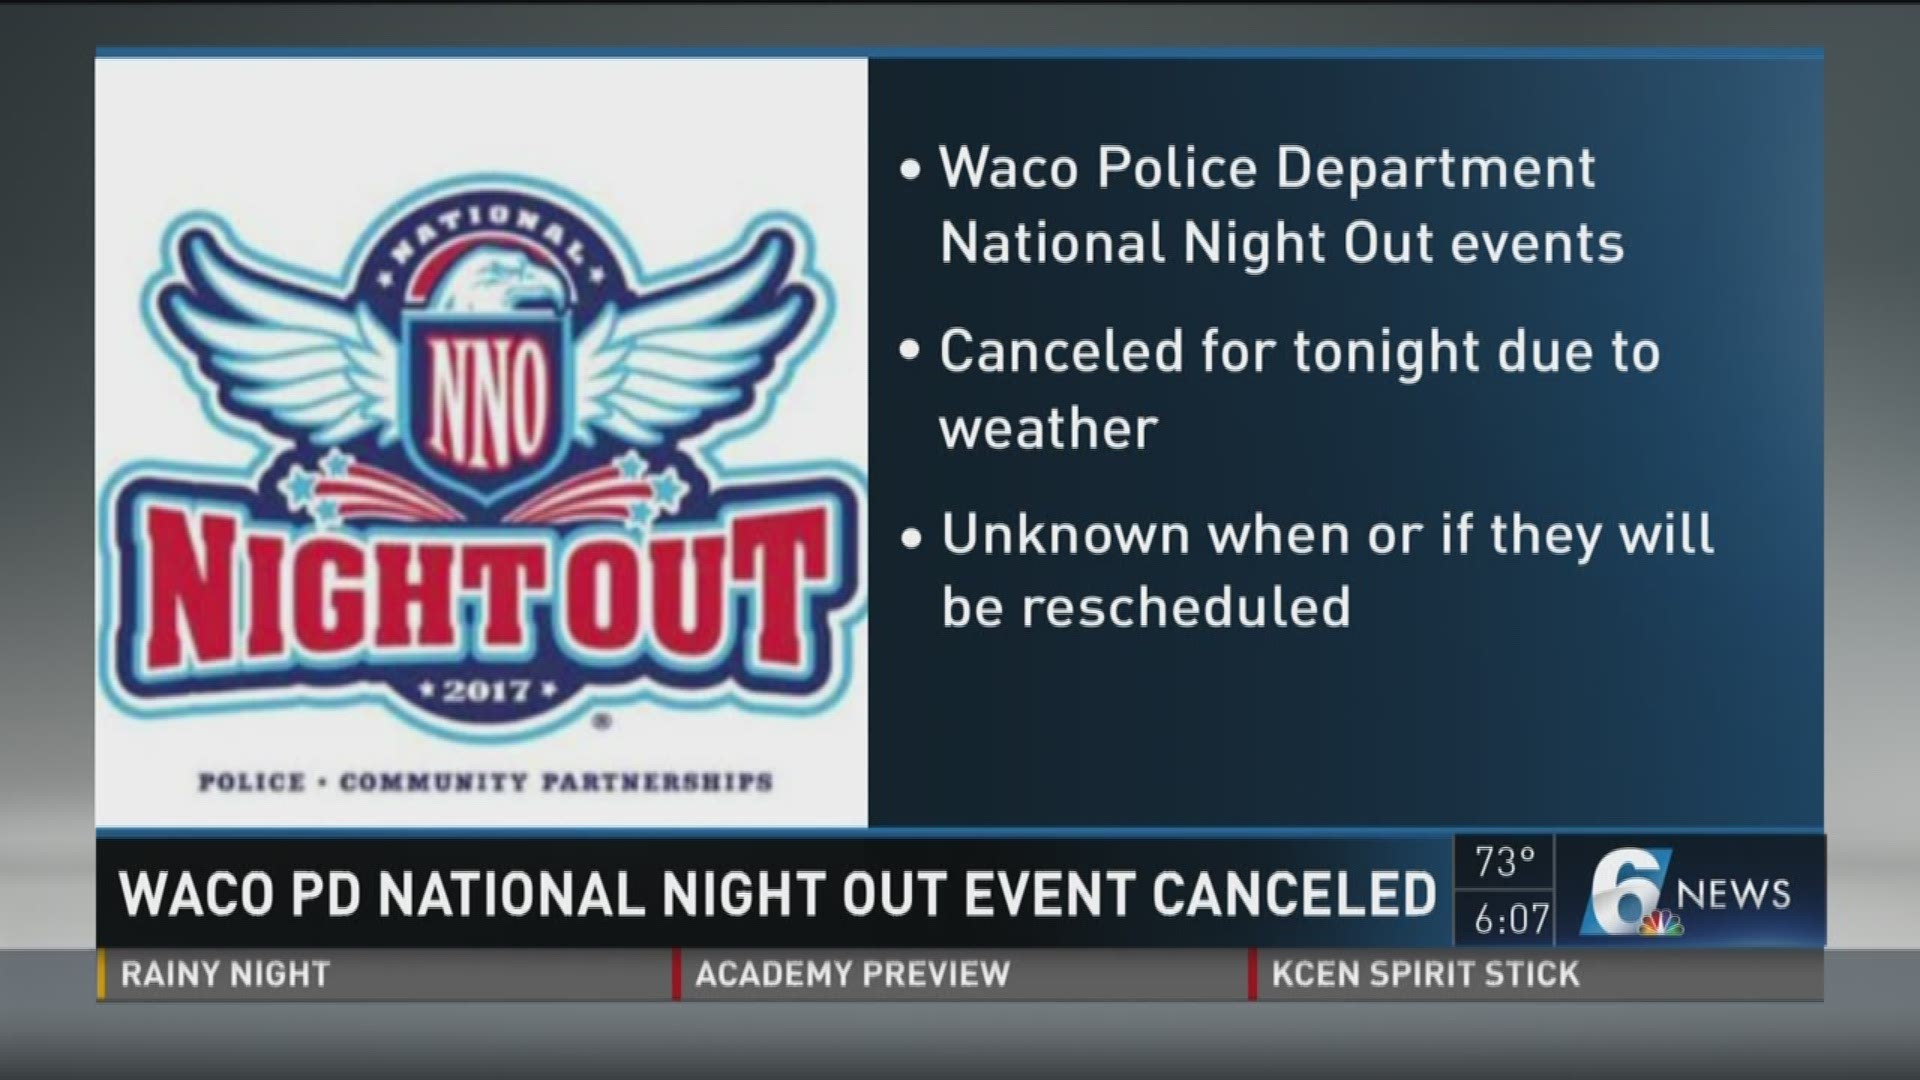 Due to the weather, all Waco Police Department National Night Out Events scheduled are canceled.